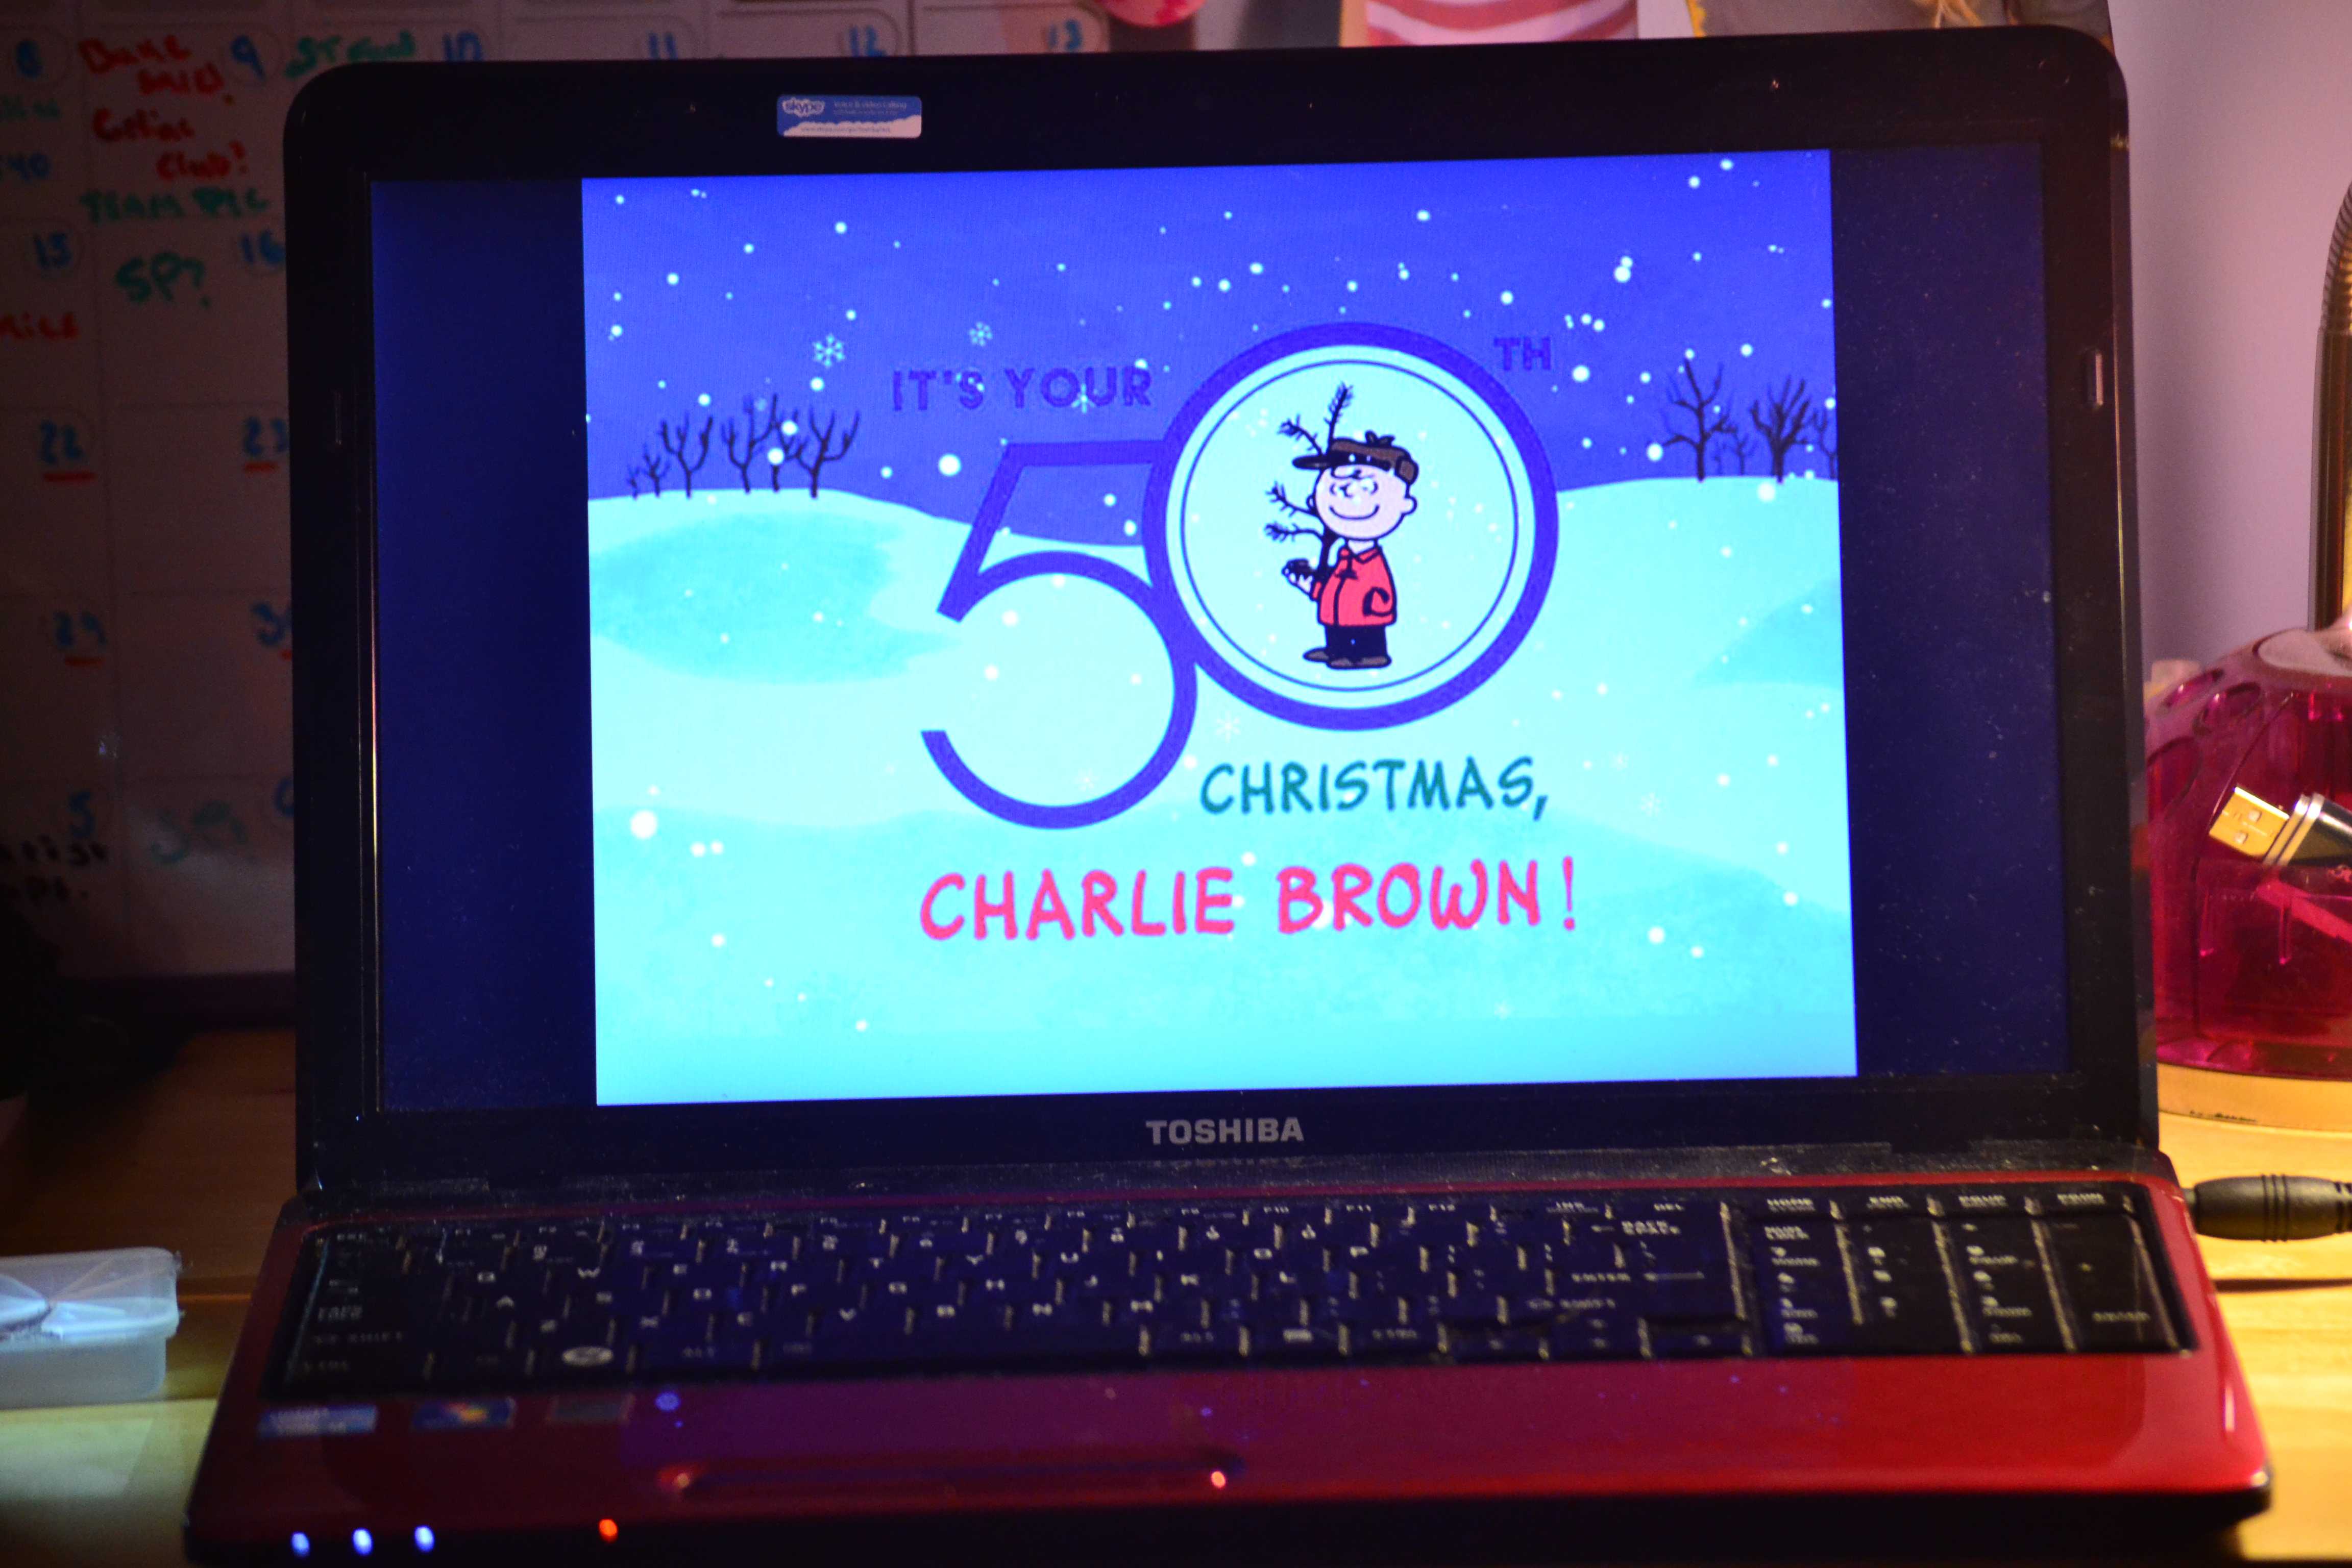 Charlie Browns classic Christmas special is a staple of the holiday season